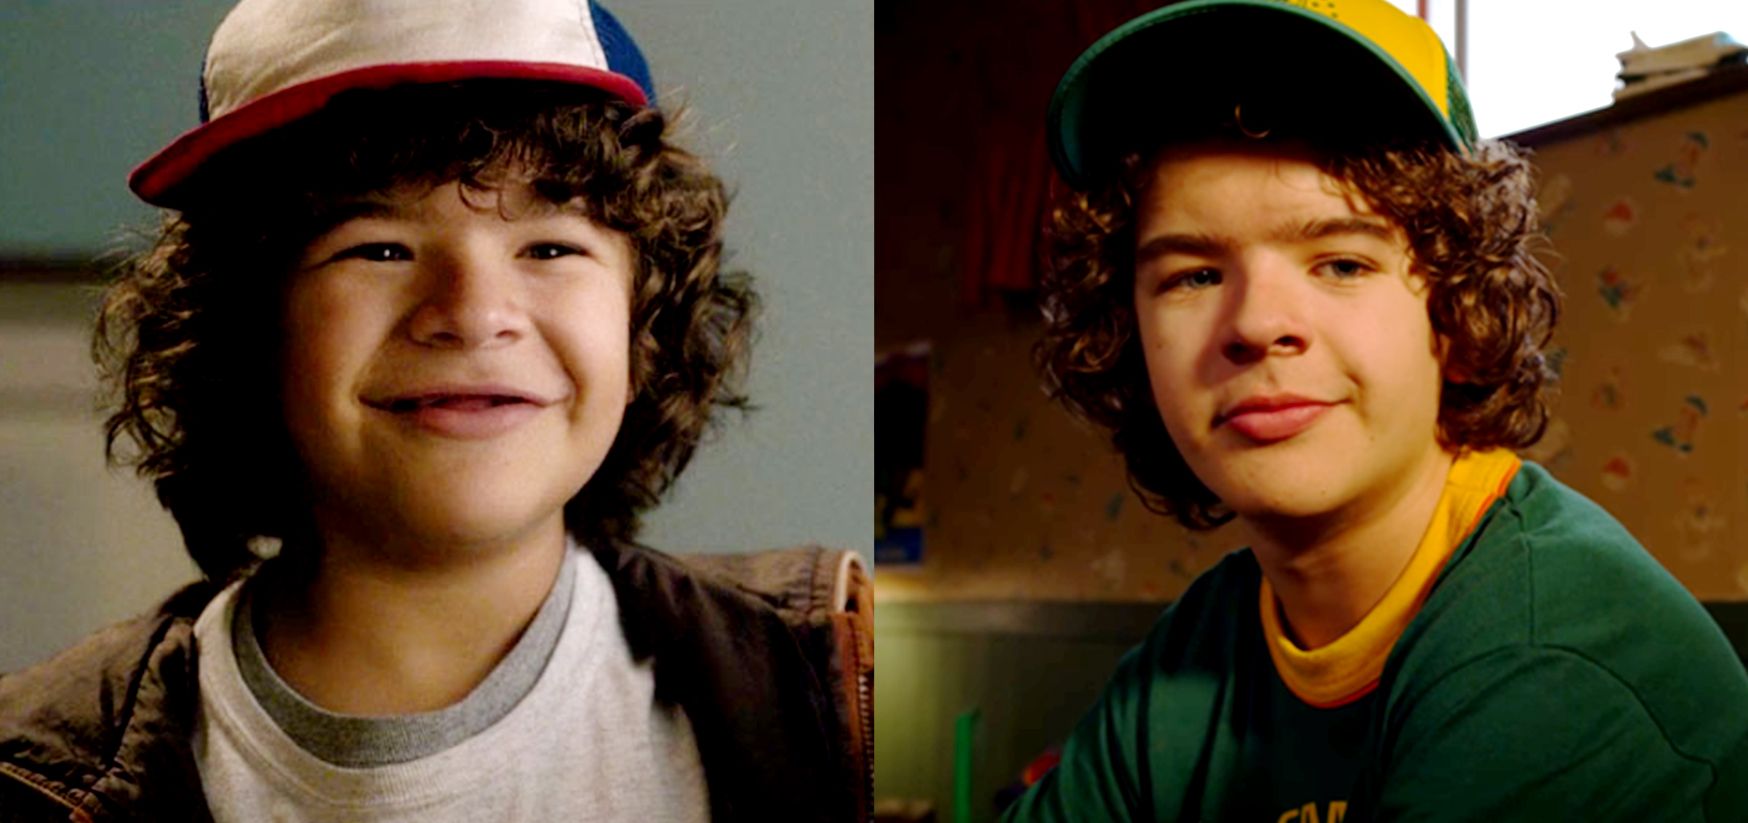 The Stranger Things Kids Have Really Grown Up - Stranger Things Cast Then  and Now